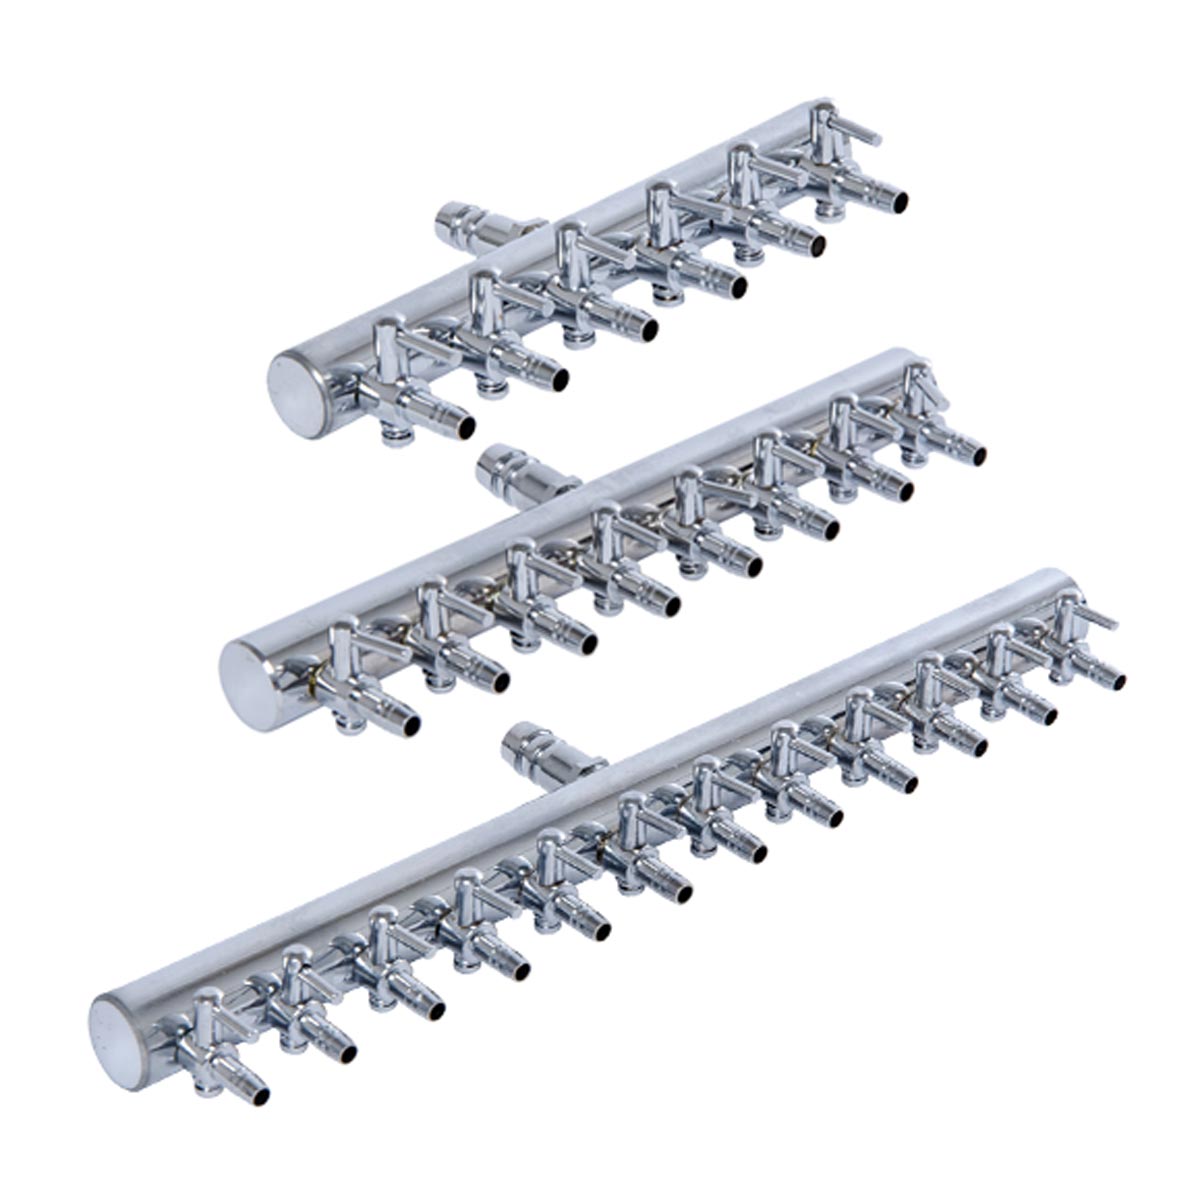 4 Outlet Multi-Outlet Air Manifold 